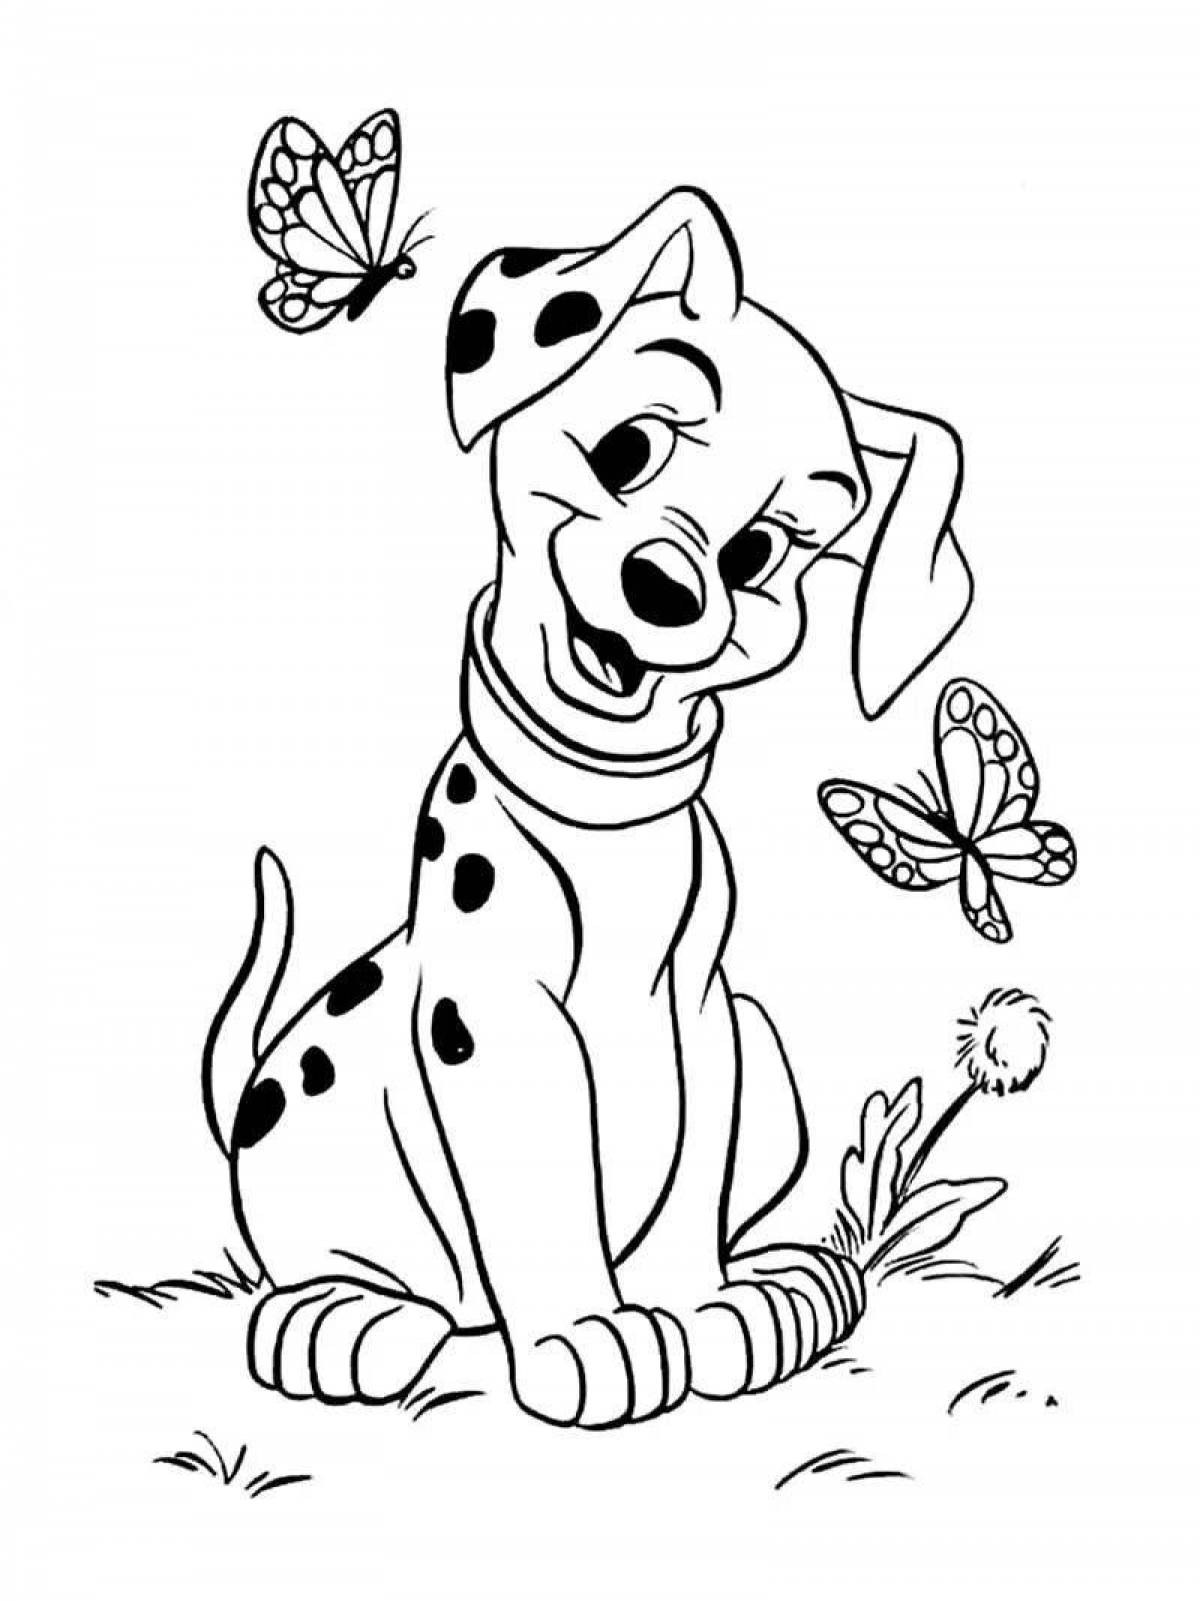 Witty cartoon dog coloring book